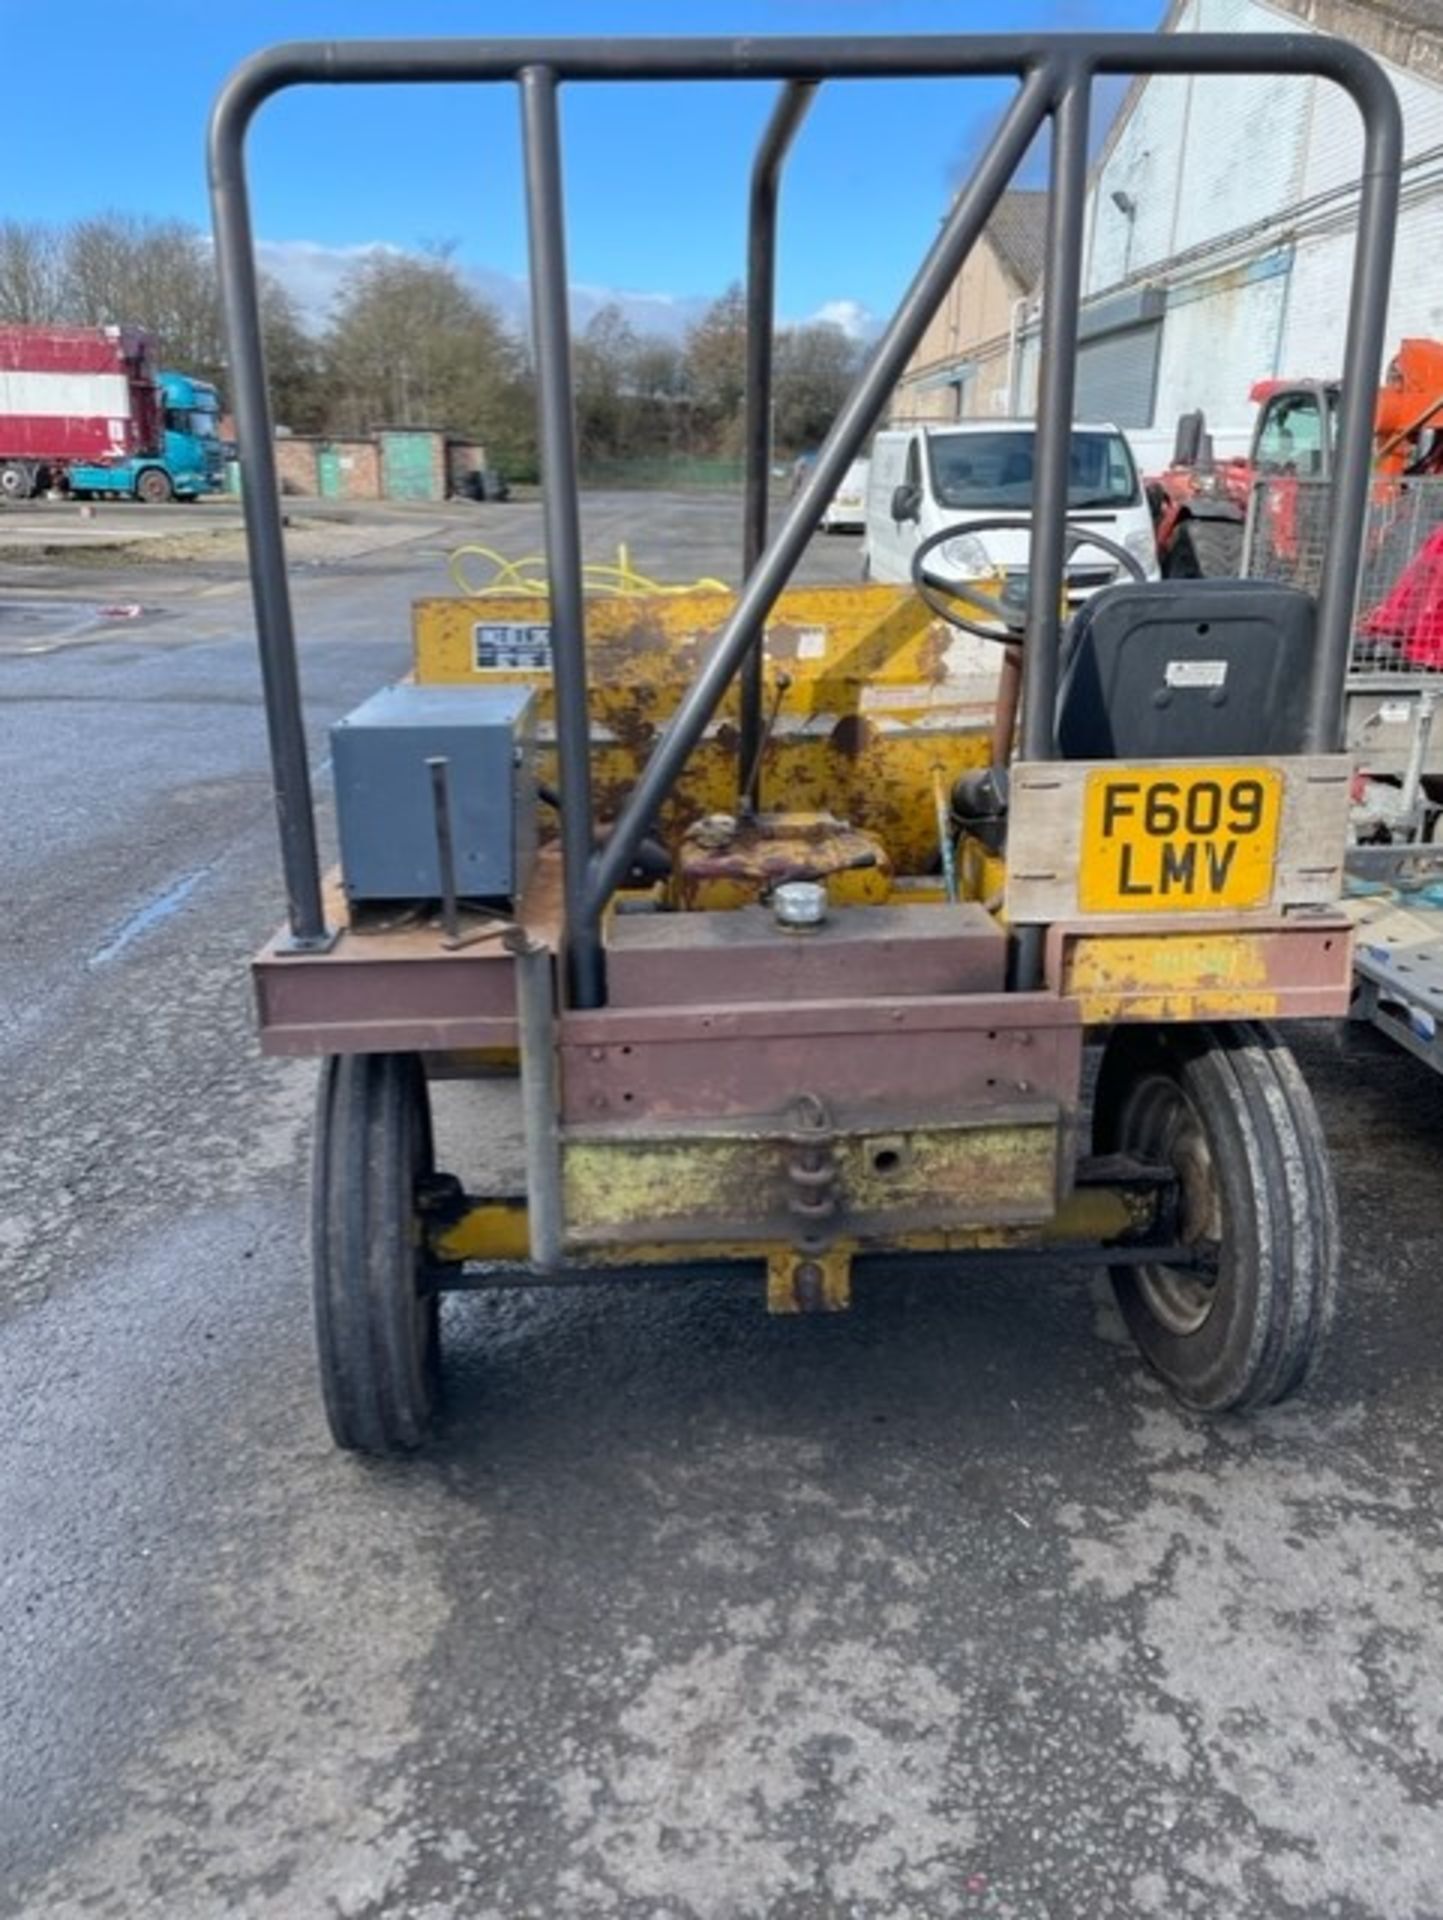 Dumper registration on the road 2wheel drive it’s from 1989 so 34 years old crank start first pull